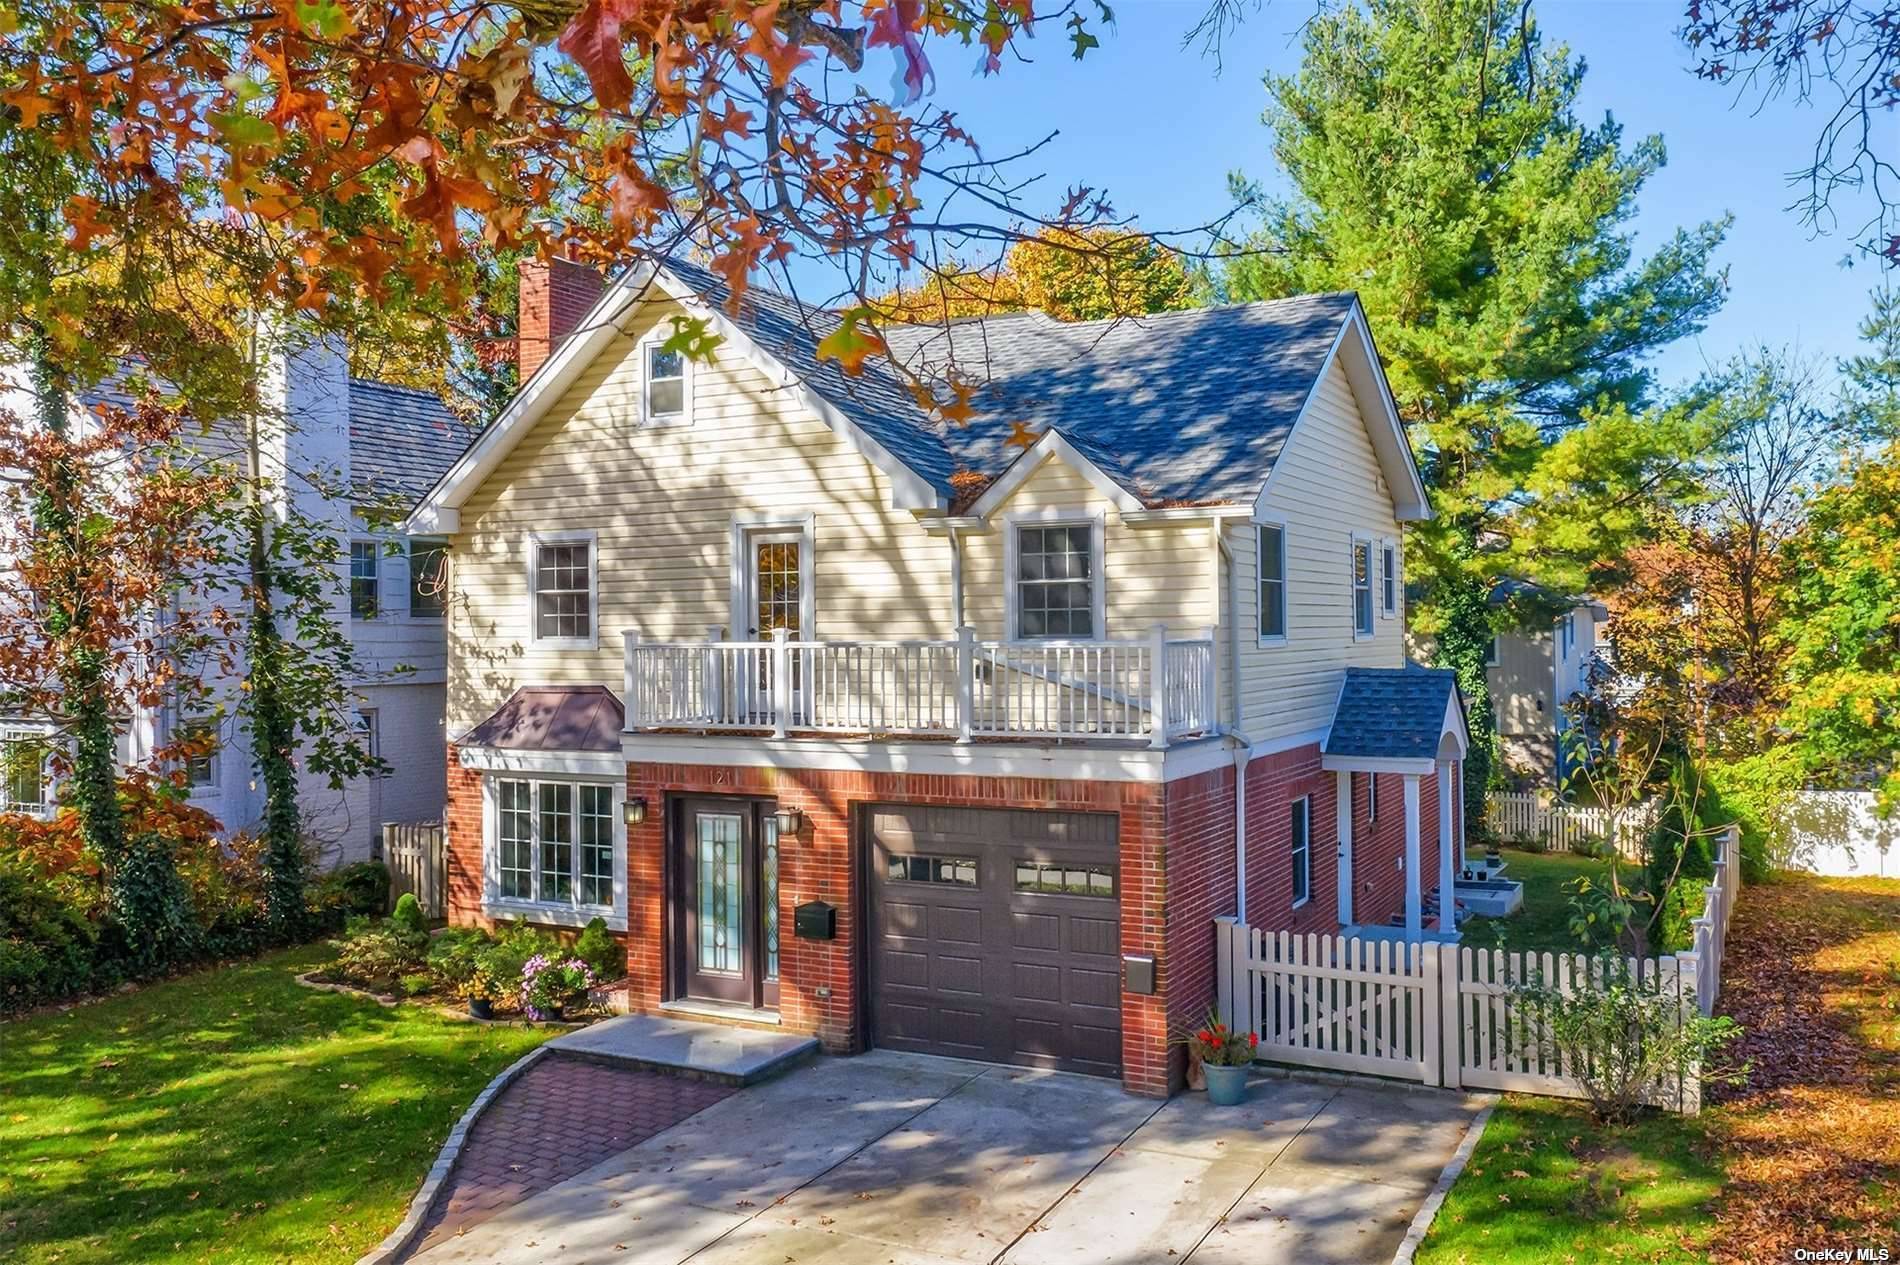 Welcome to the luxurious living provided by this stunning southern exposure colonial on Park Avenue in Manhasset.